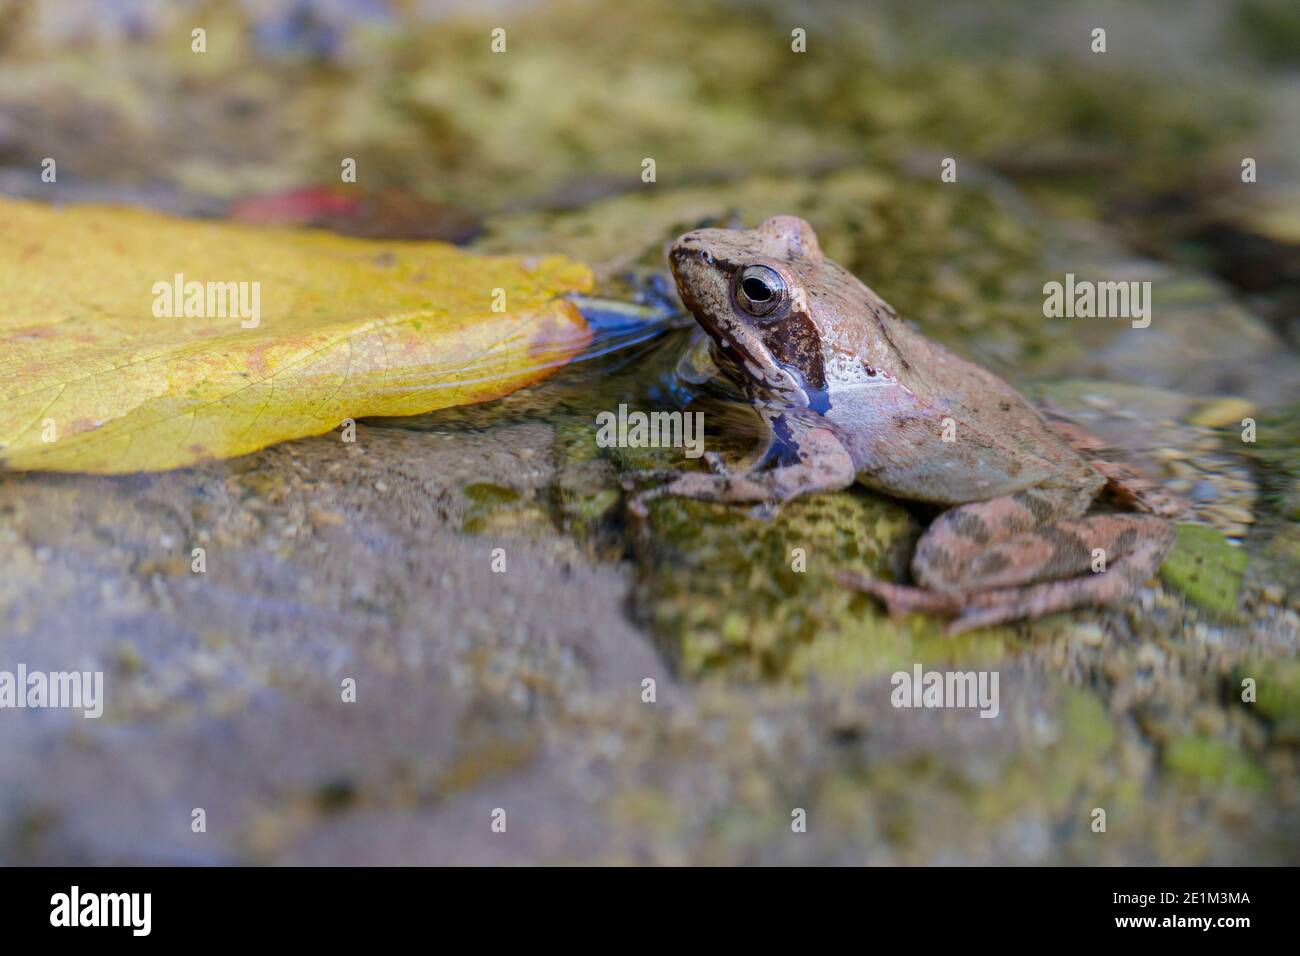 Italian Stream Frog (Rana italica), side view of an adult in the water, Campania, Italy Stock Photo